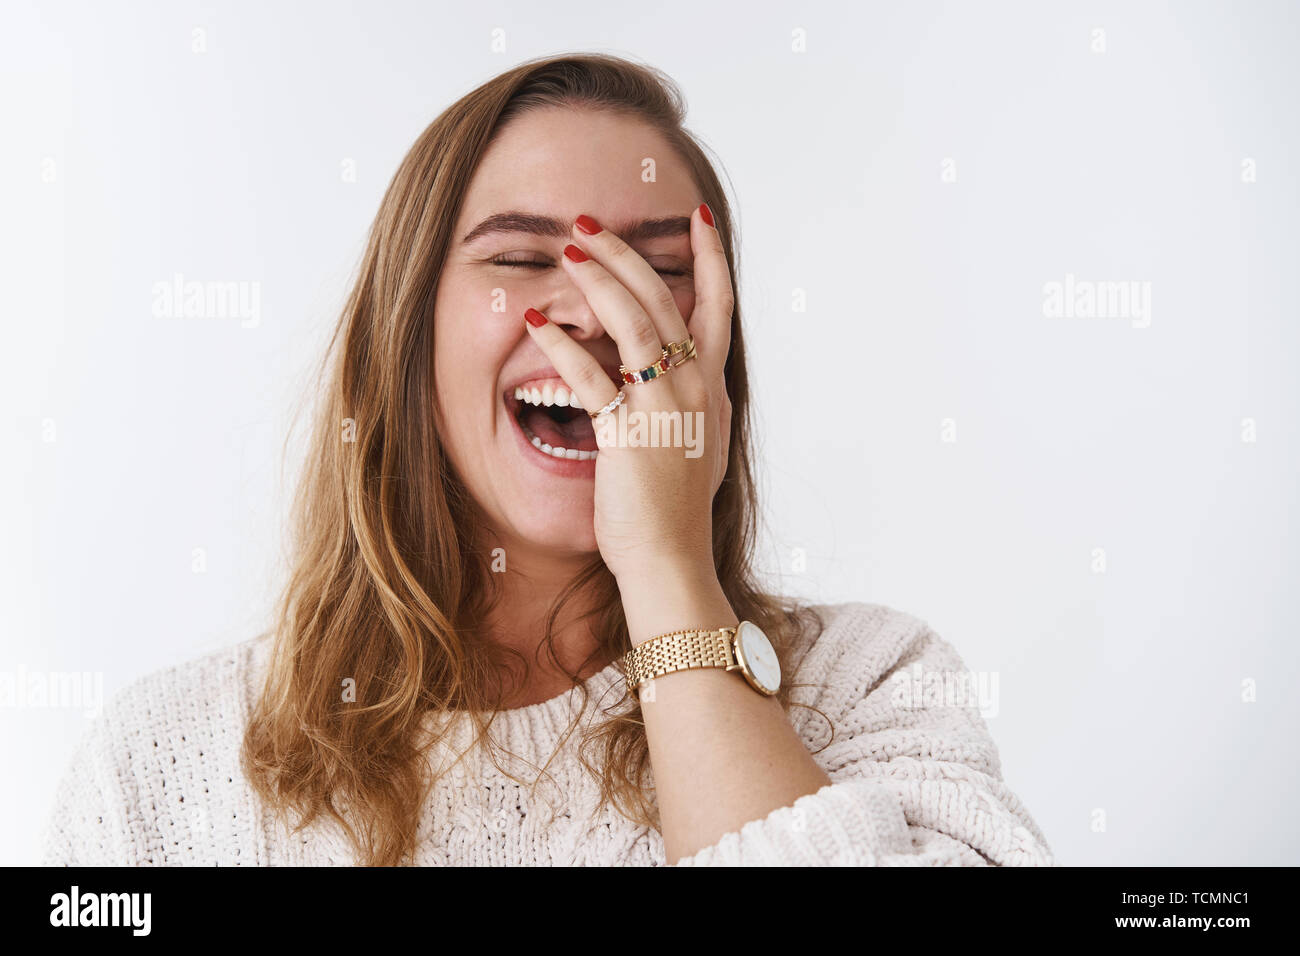 Lol Key Means Laughing Out Loud Funny Or Laugh Stock Photo - Alamy